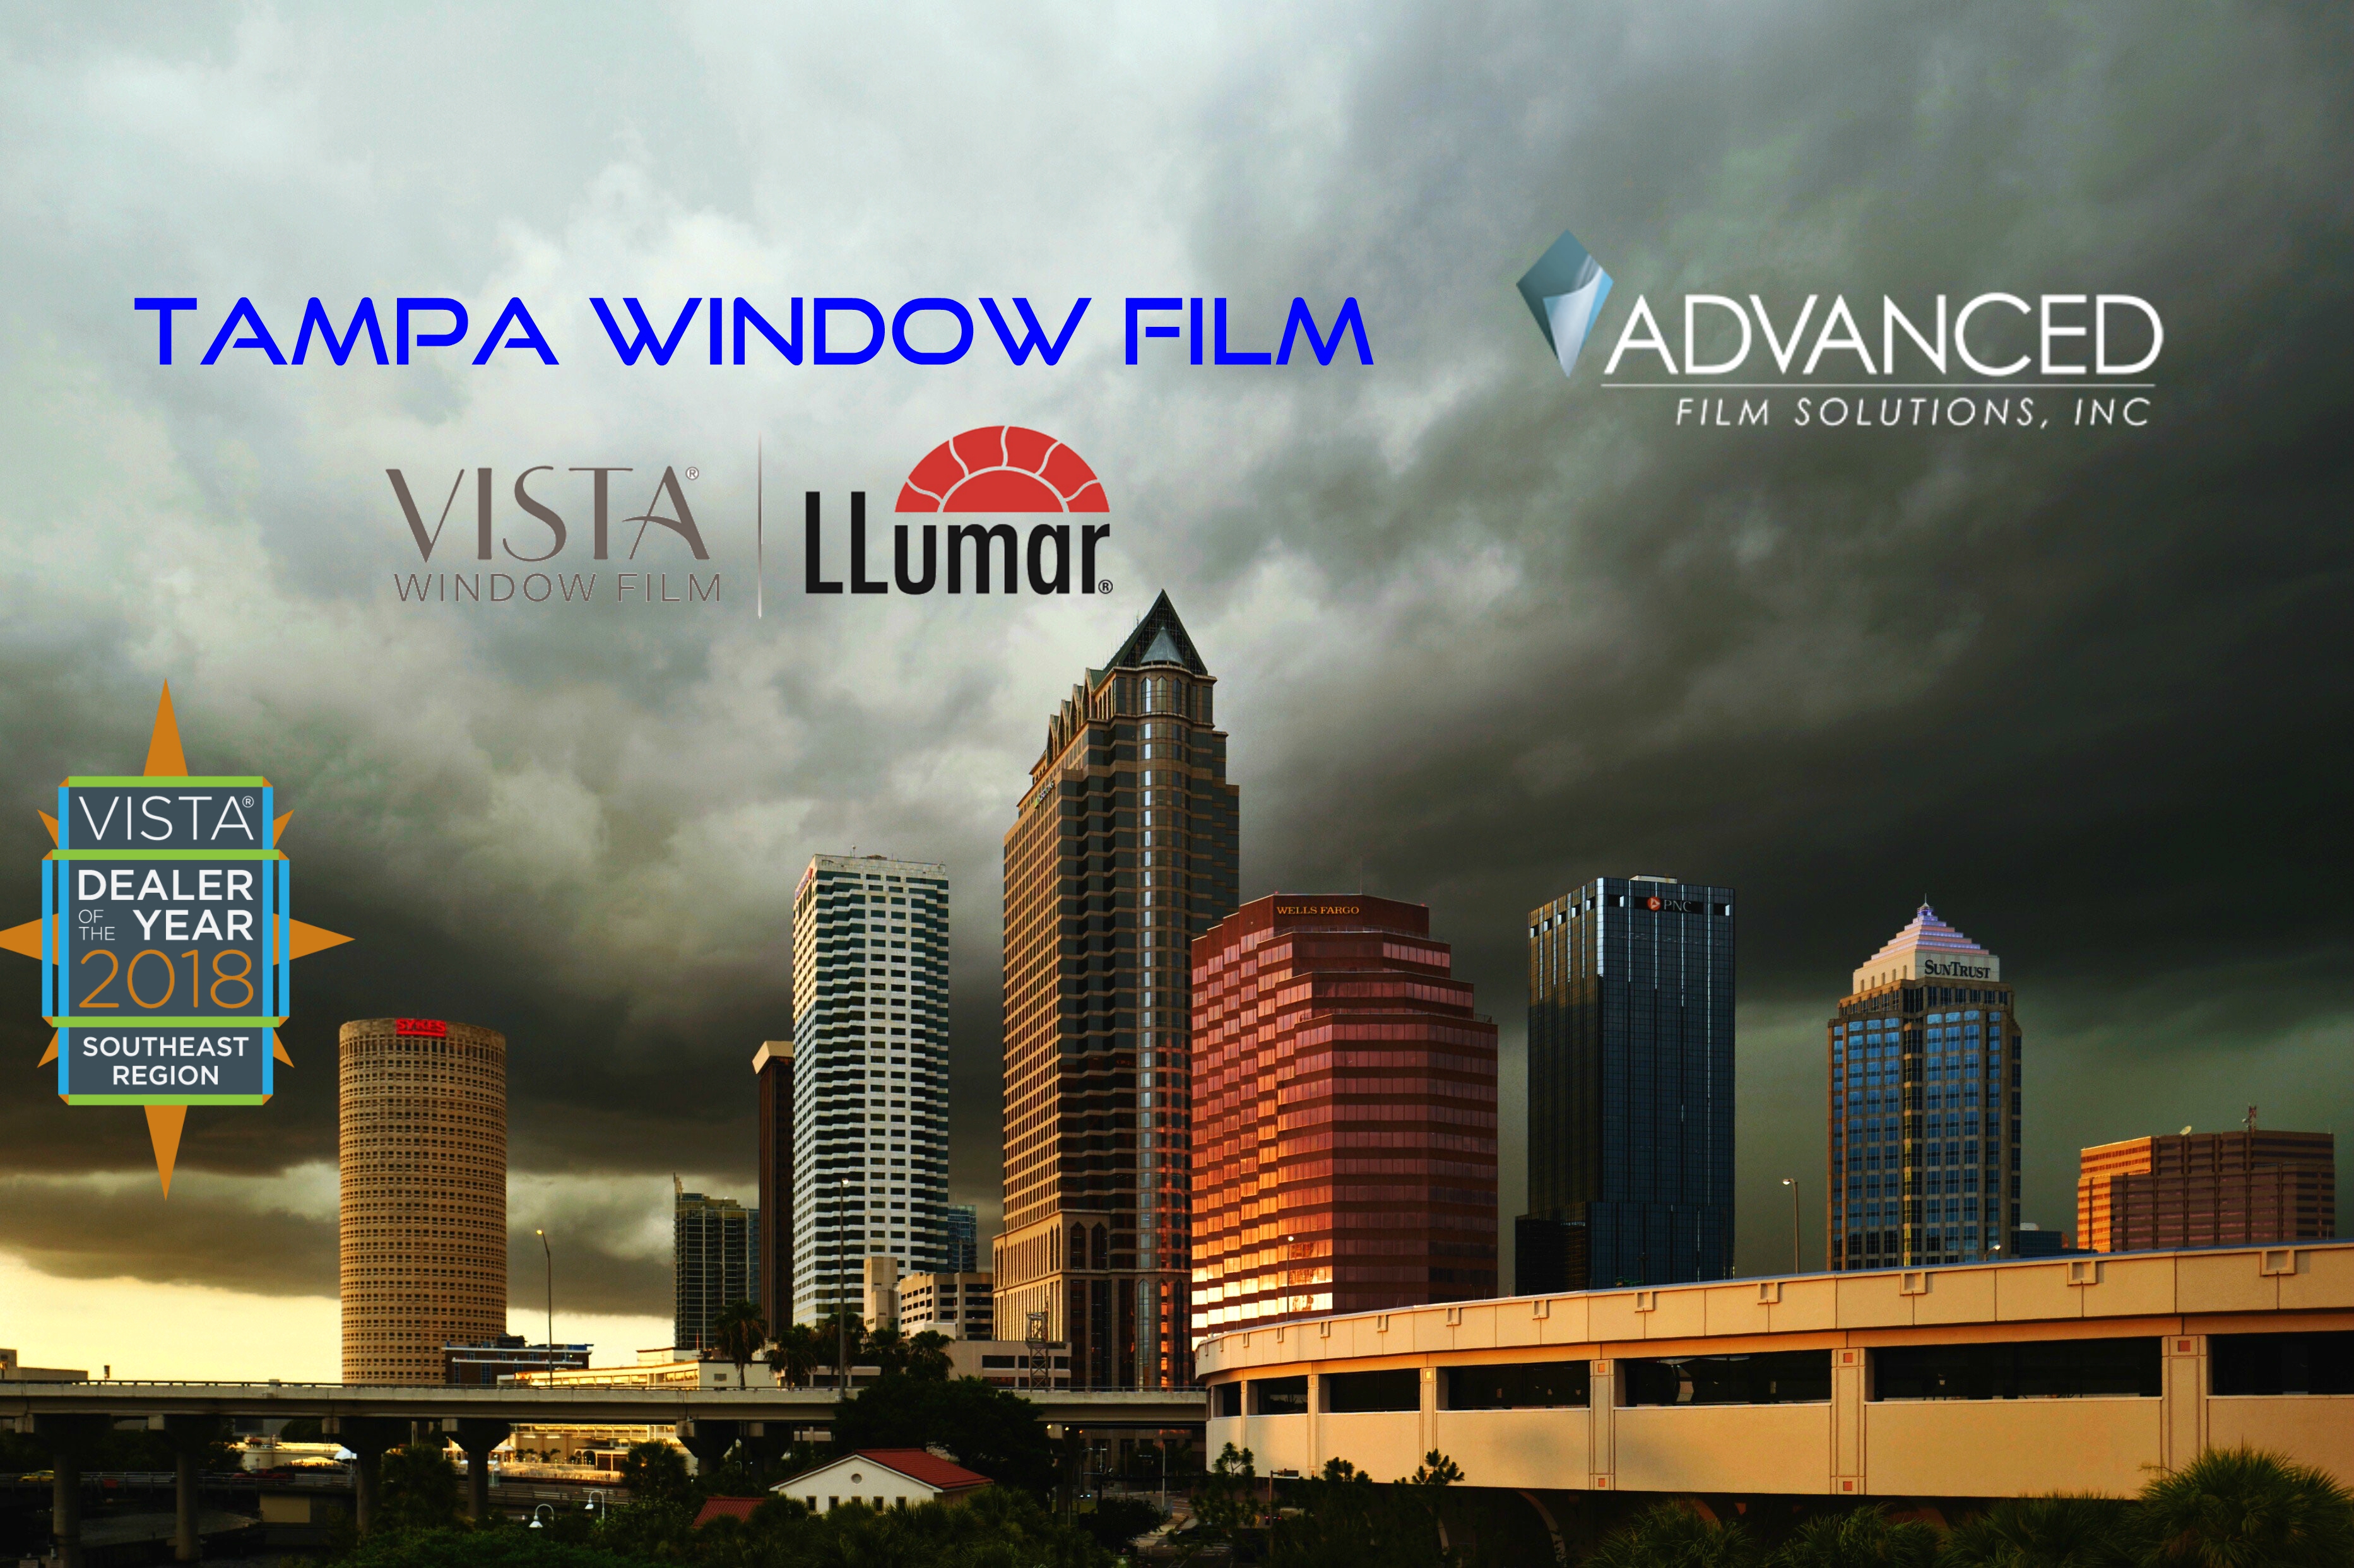 Make Your Tampa Home Cool This Summer With Advanced Film Solutions